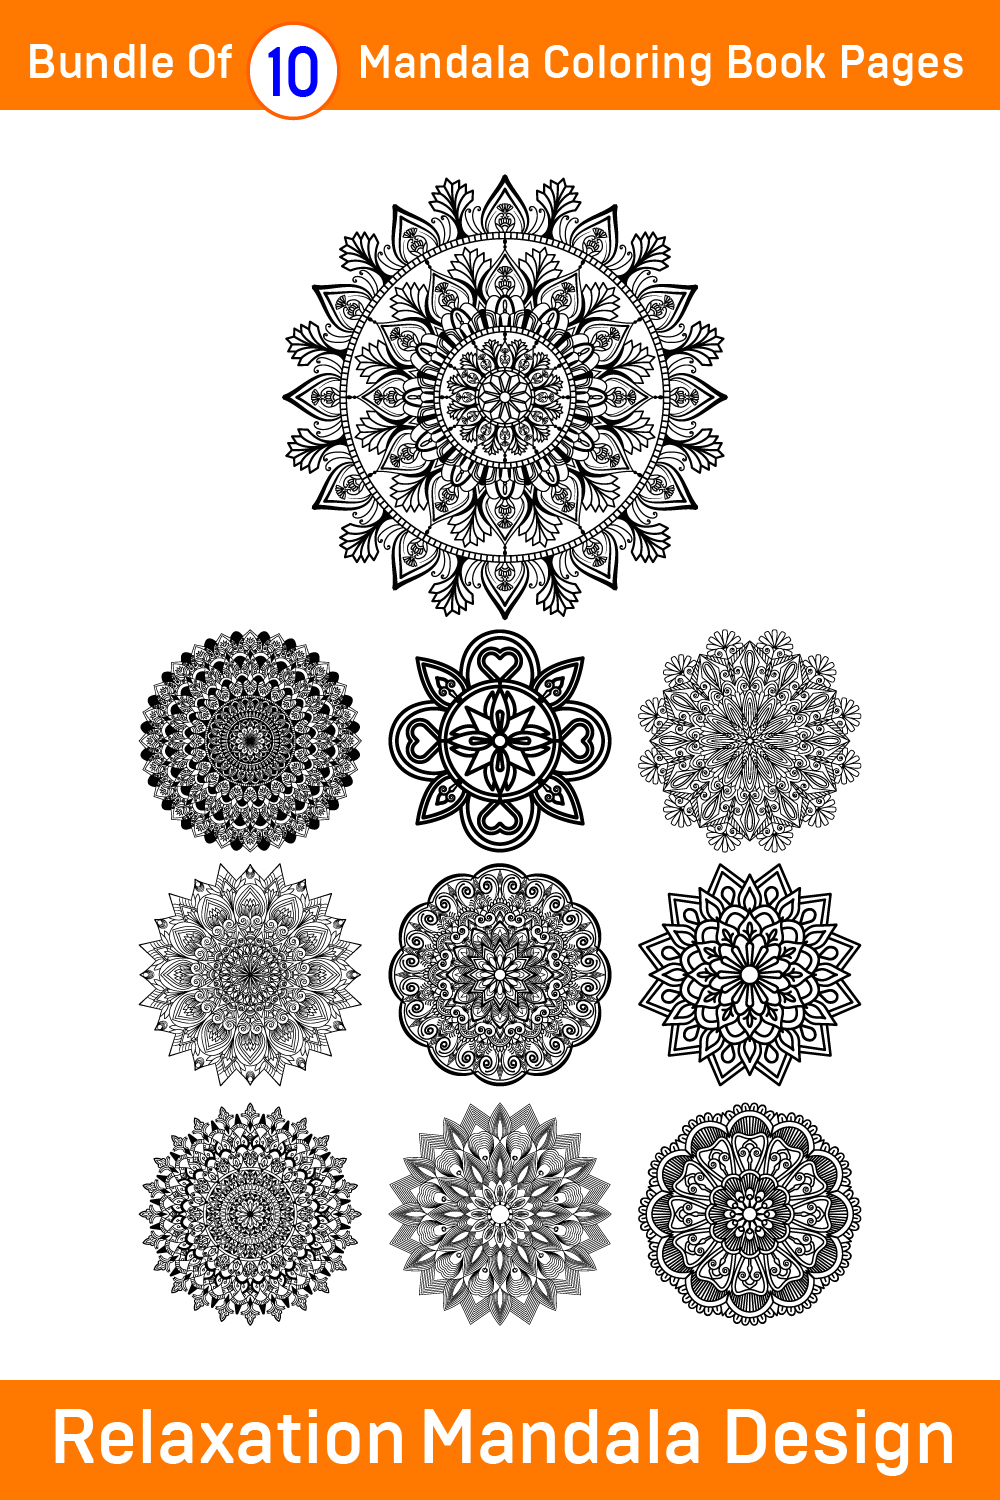 Bundle of 10 Relaxation Mandalas for Paper Cutting or Coloring Book pinterest preview image.